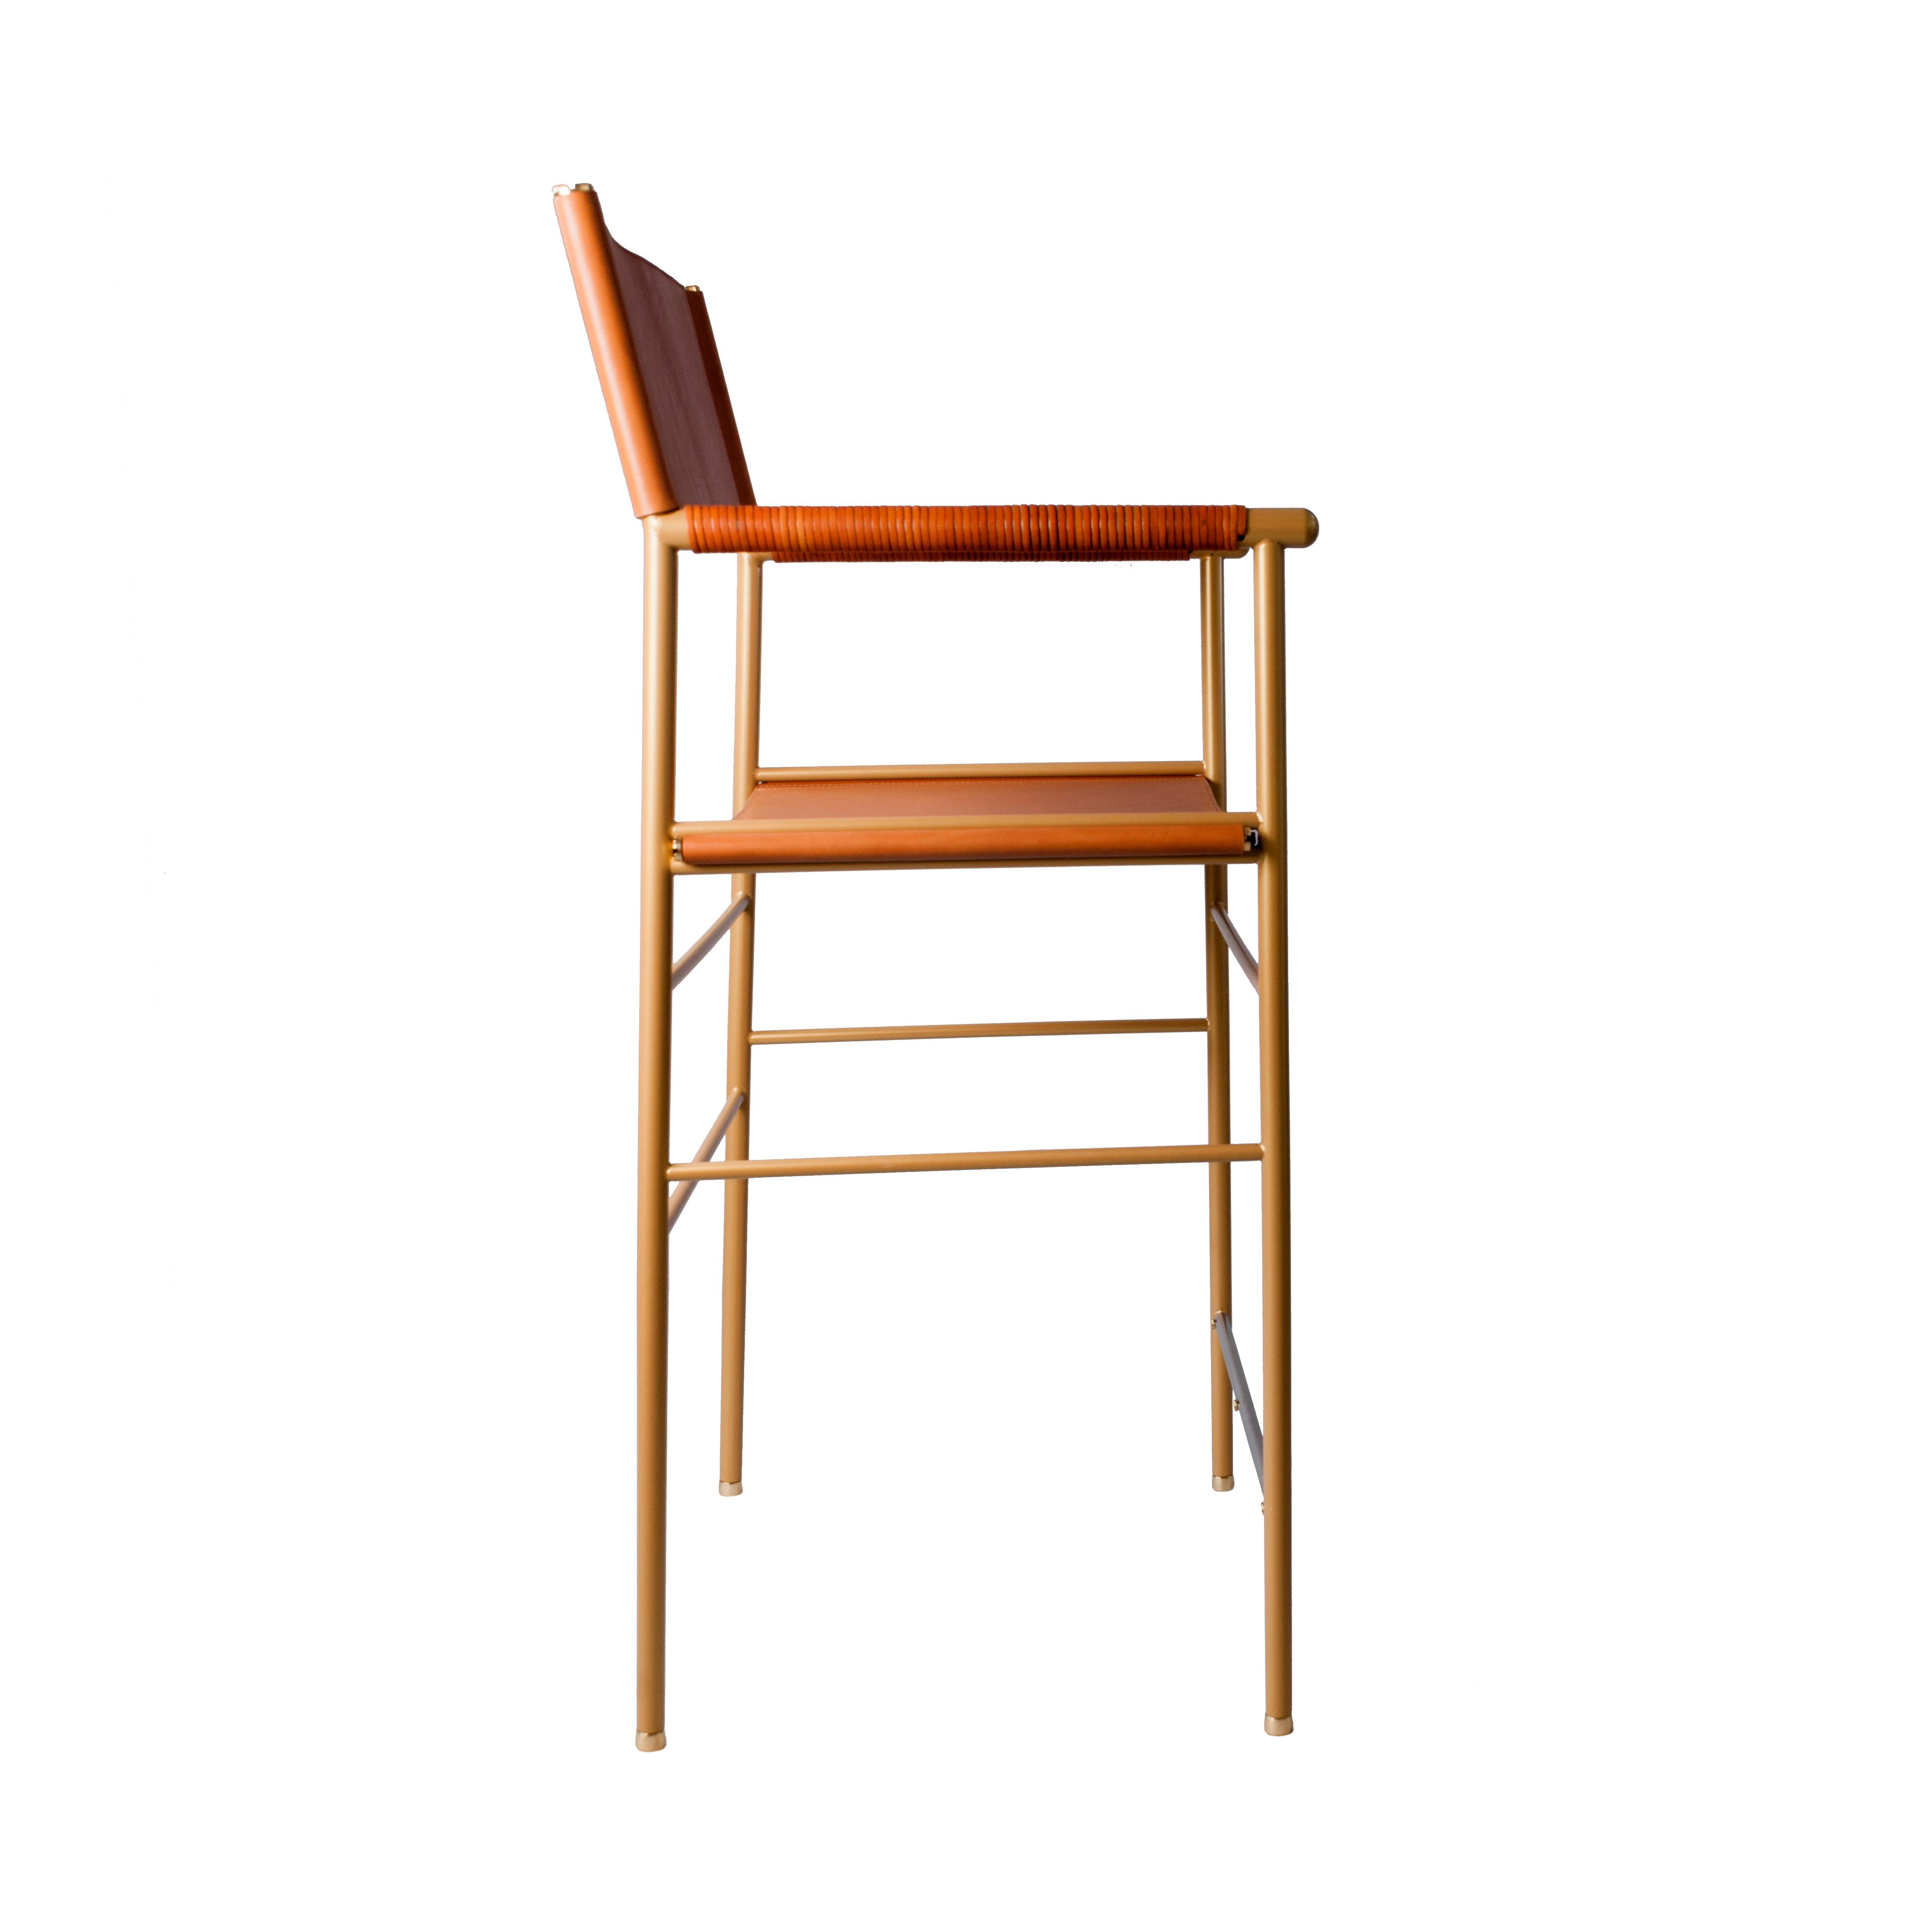 Modern Set of 3 Counter Bar Stools w. Backrest - Tan Leather & Aged Brass Powder Coated For Sale